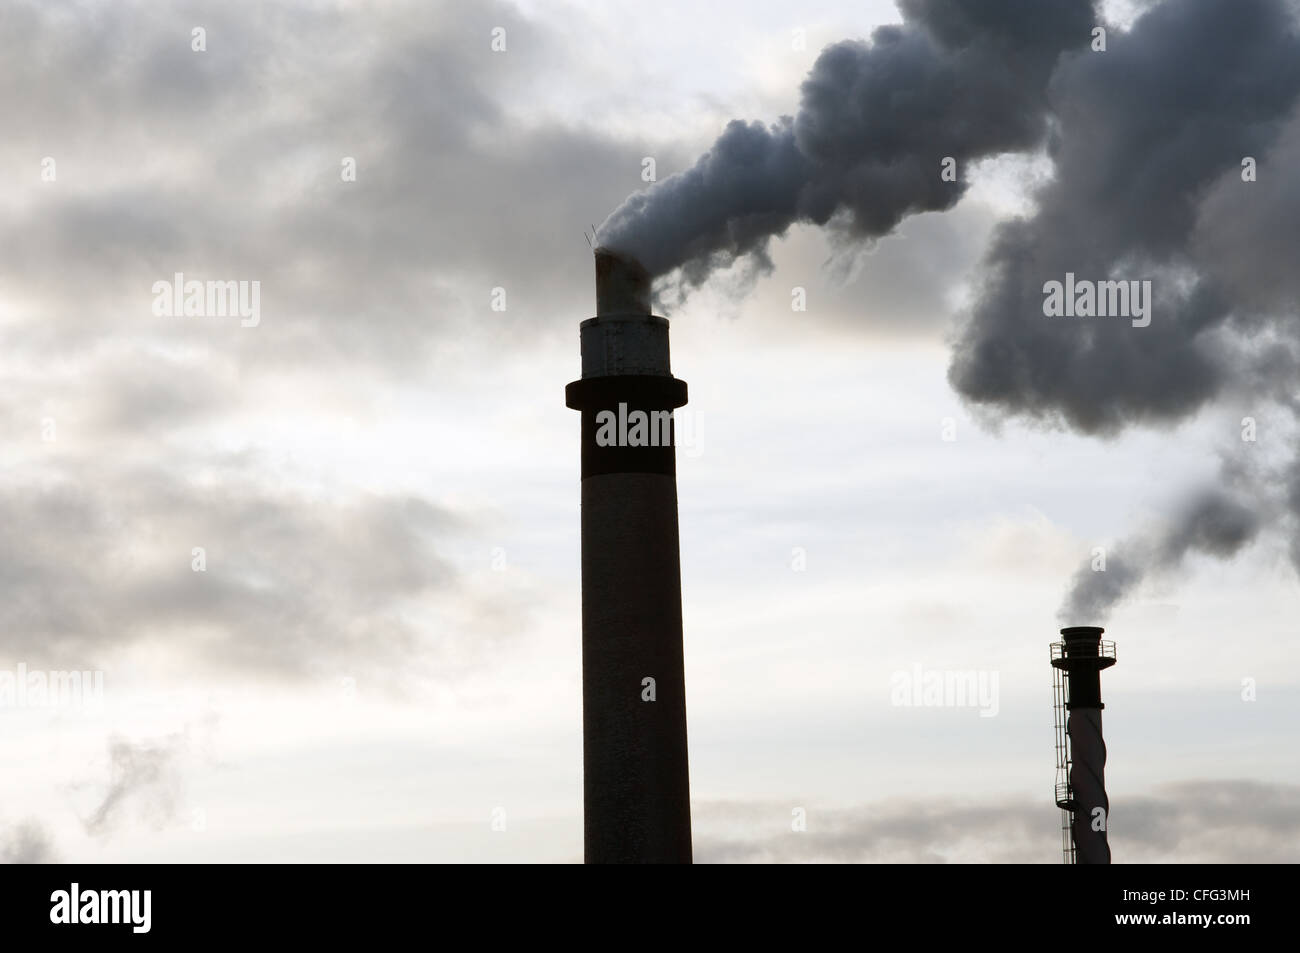 Chemical factory Germany Stock Photo